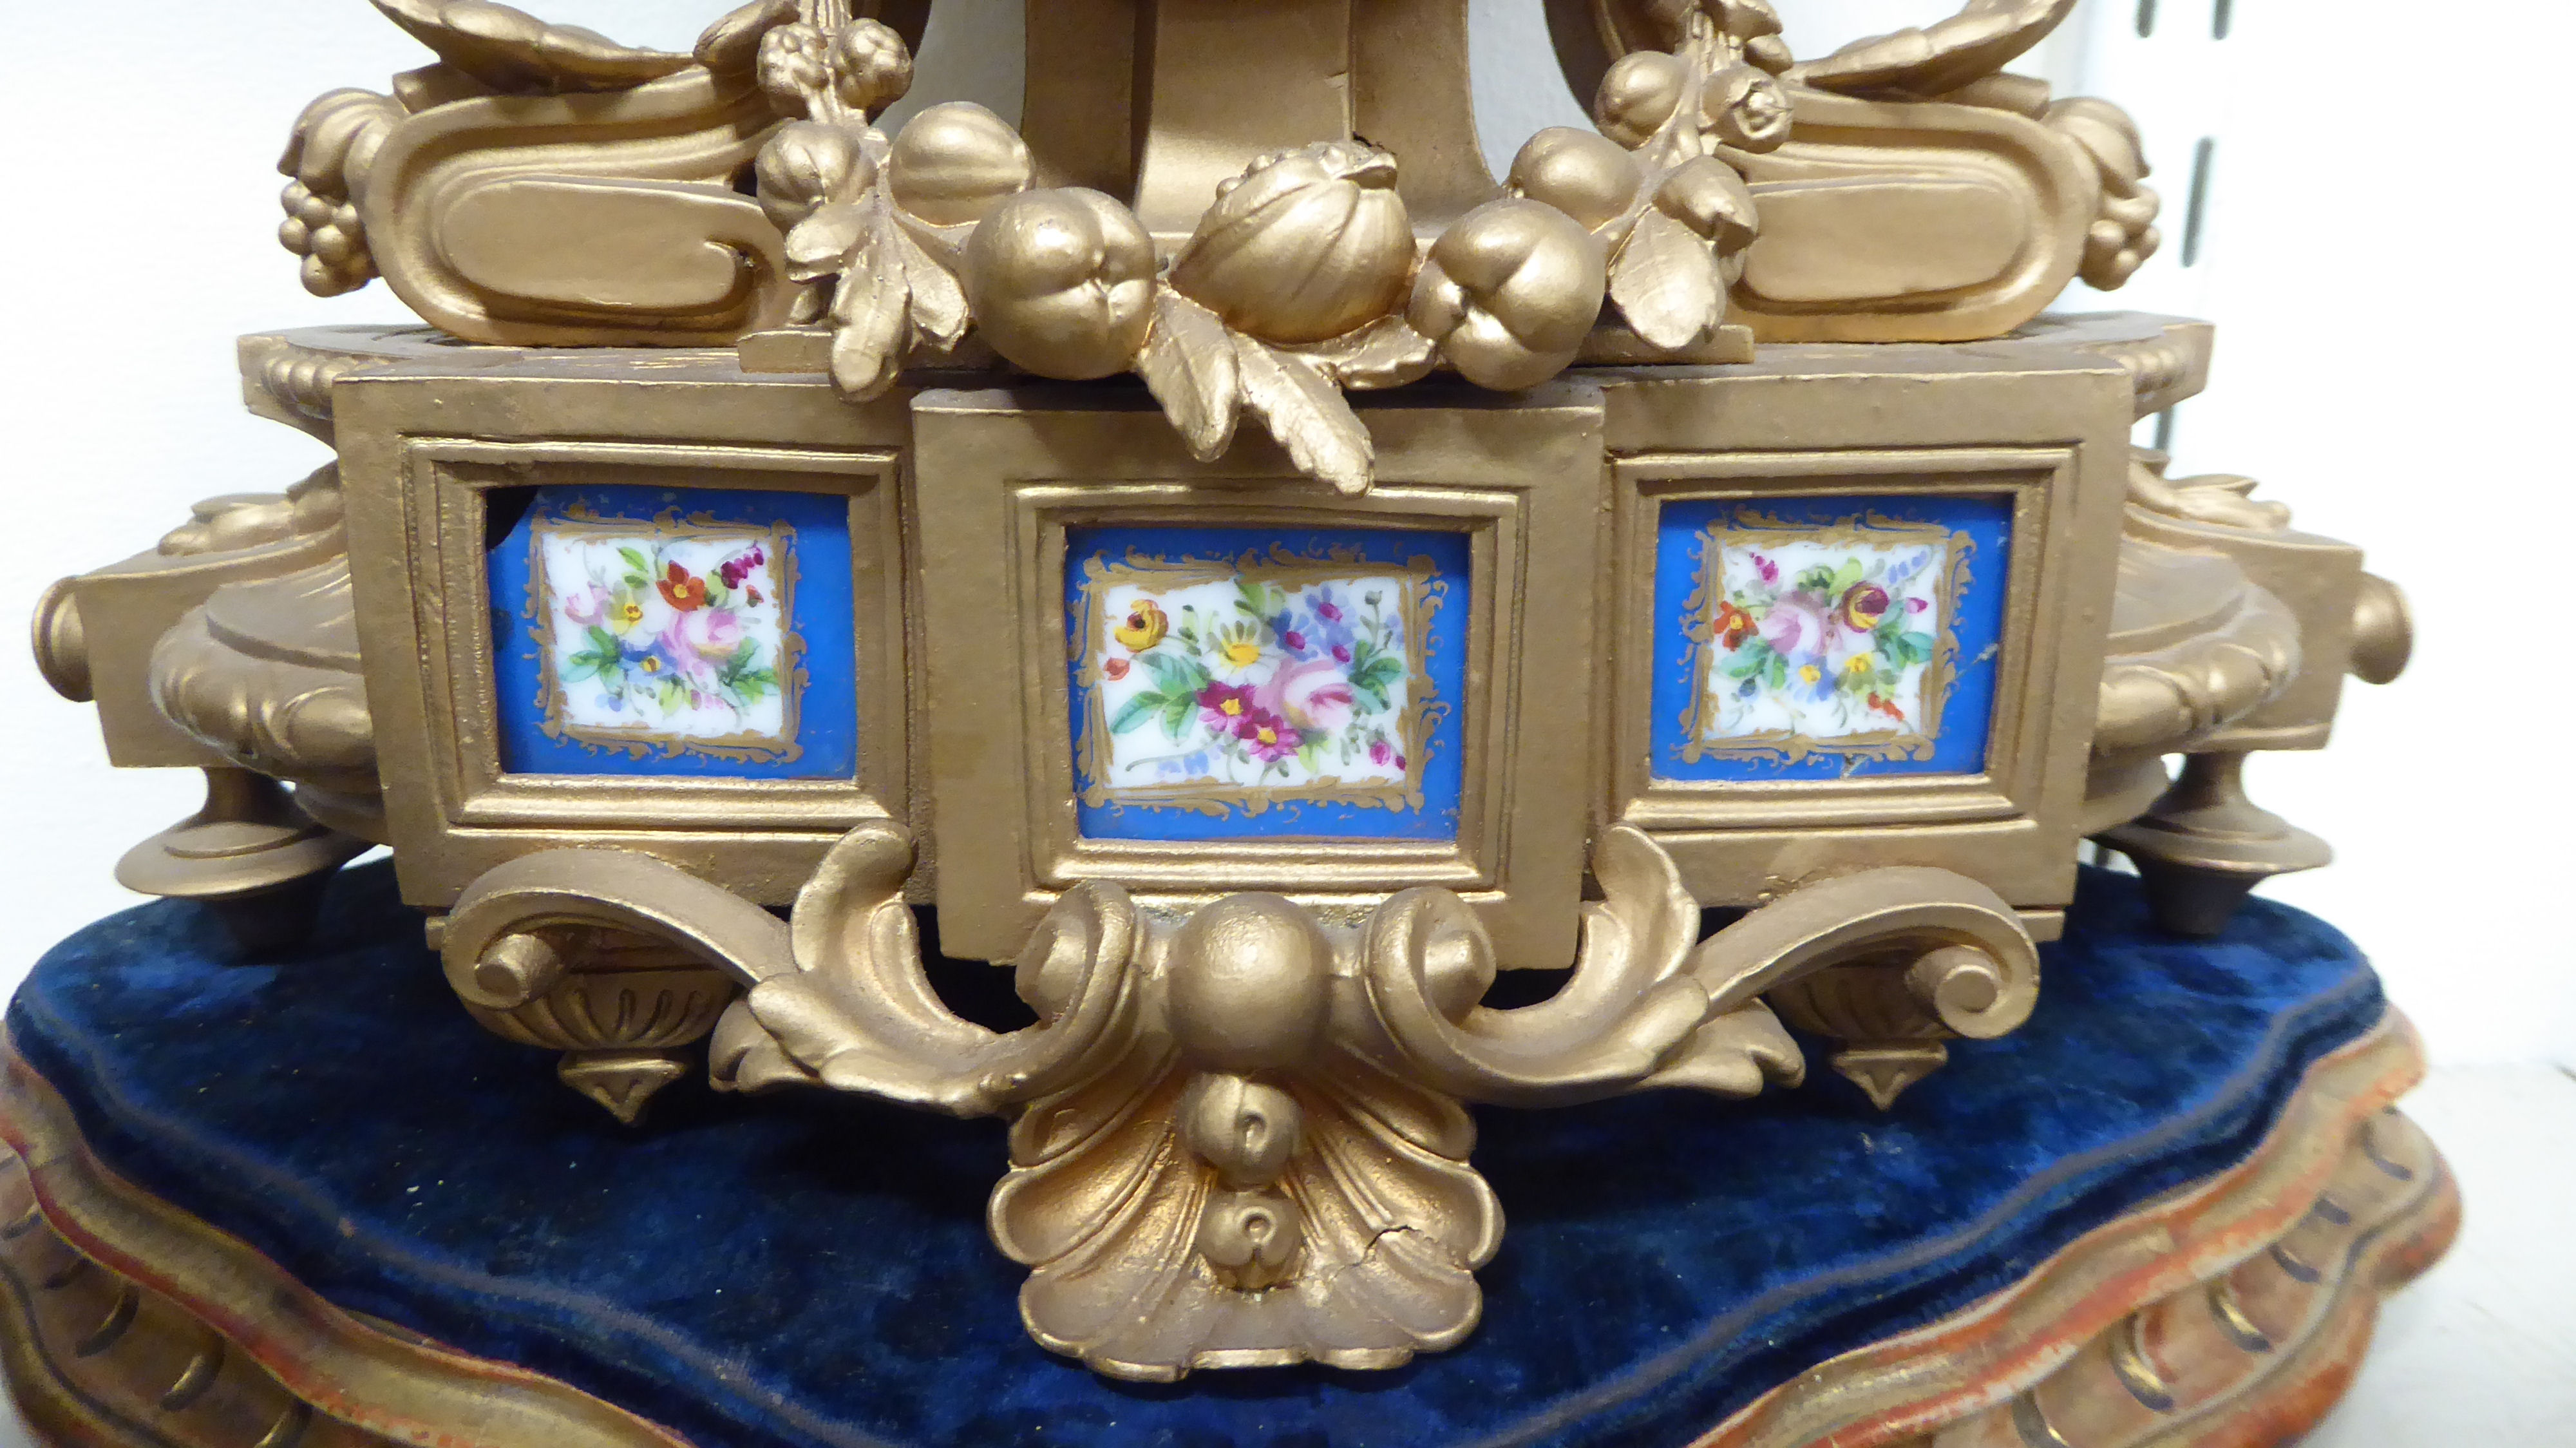 A late 19thC French gilded spelter cased mantel clock with inset, floral painted porcelain panels, - Image 4 of 4